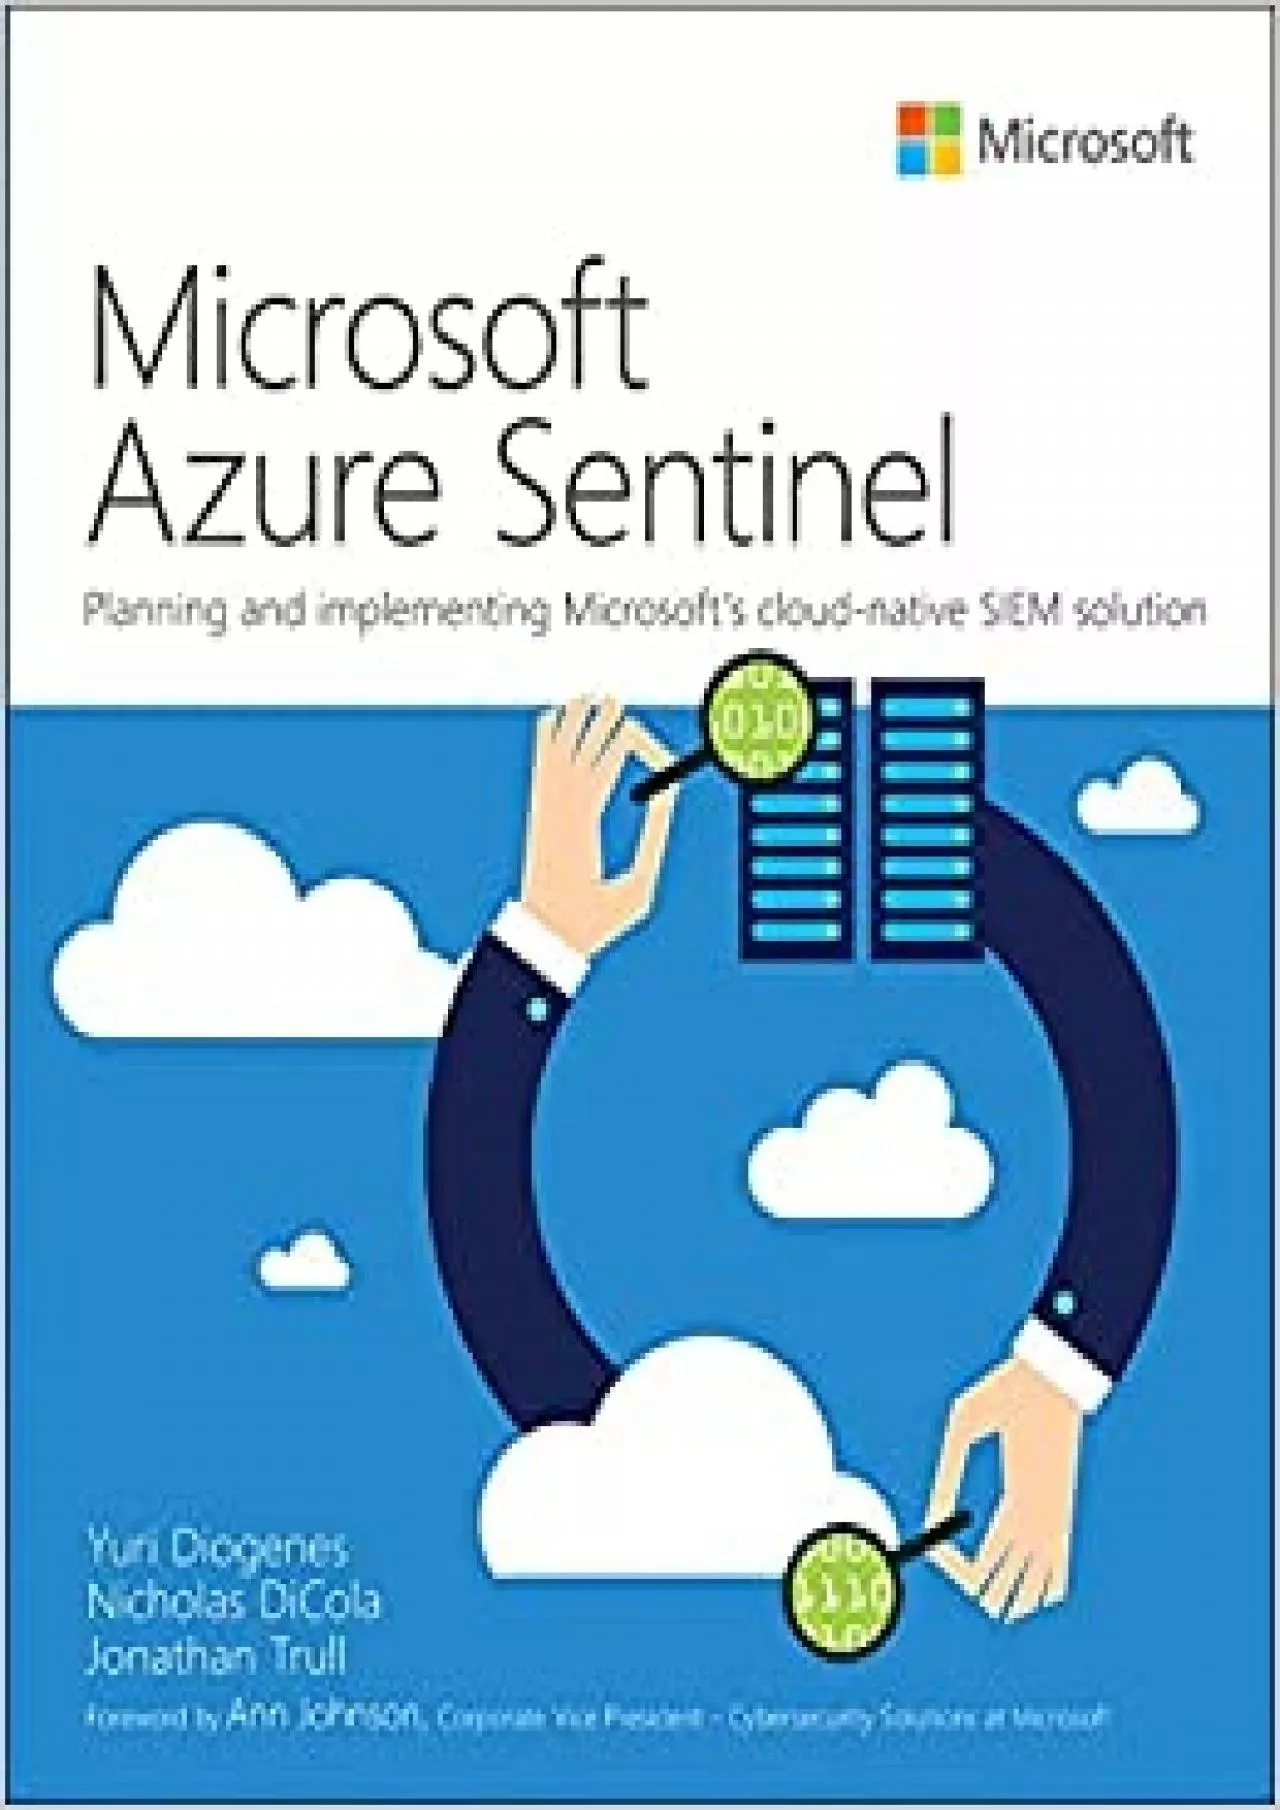 Microsoft Azure Sentinel Planning and implementing Microsoft’s cloud-native SIEM solution